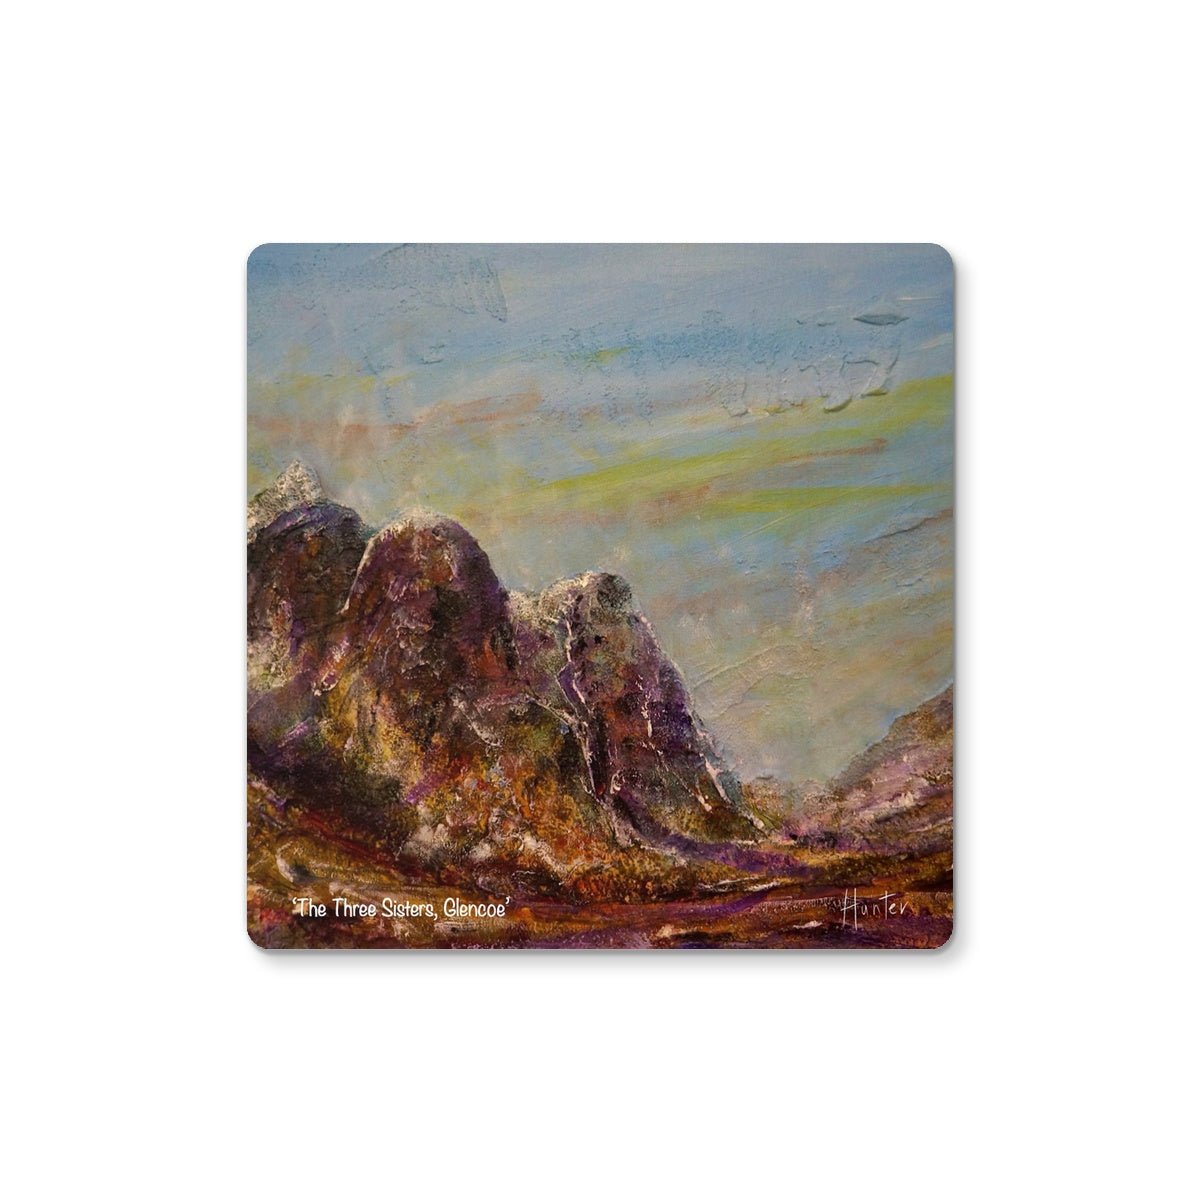 Three Sisters Glencoe Art Gifts Coaster-Coasters-Glencoe Art Gallery-2 Coasters-Paintings, Prints, Homeware, Art Gifts From Scotland By Scottish Artist Kevin Hunter